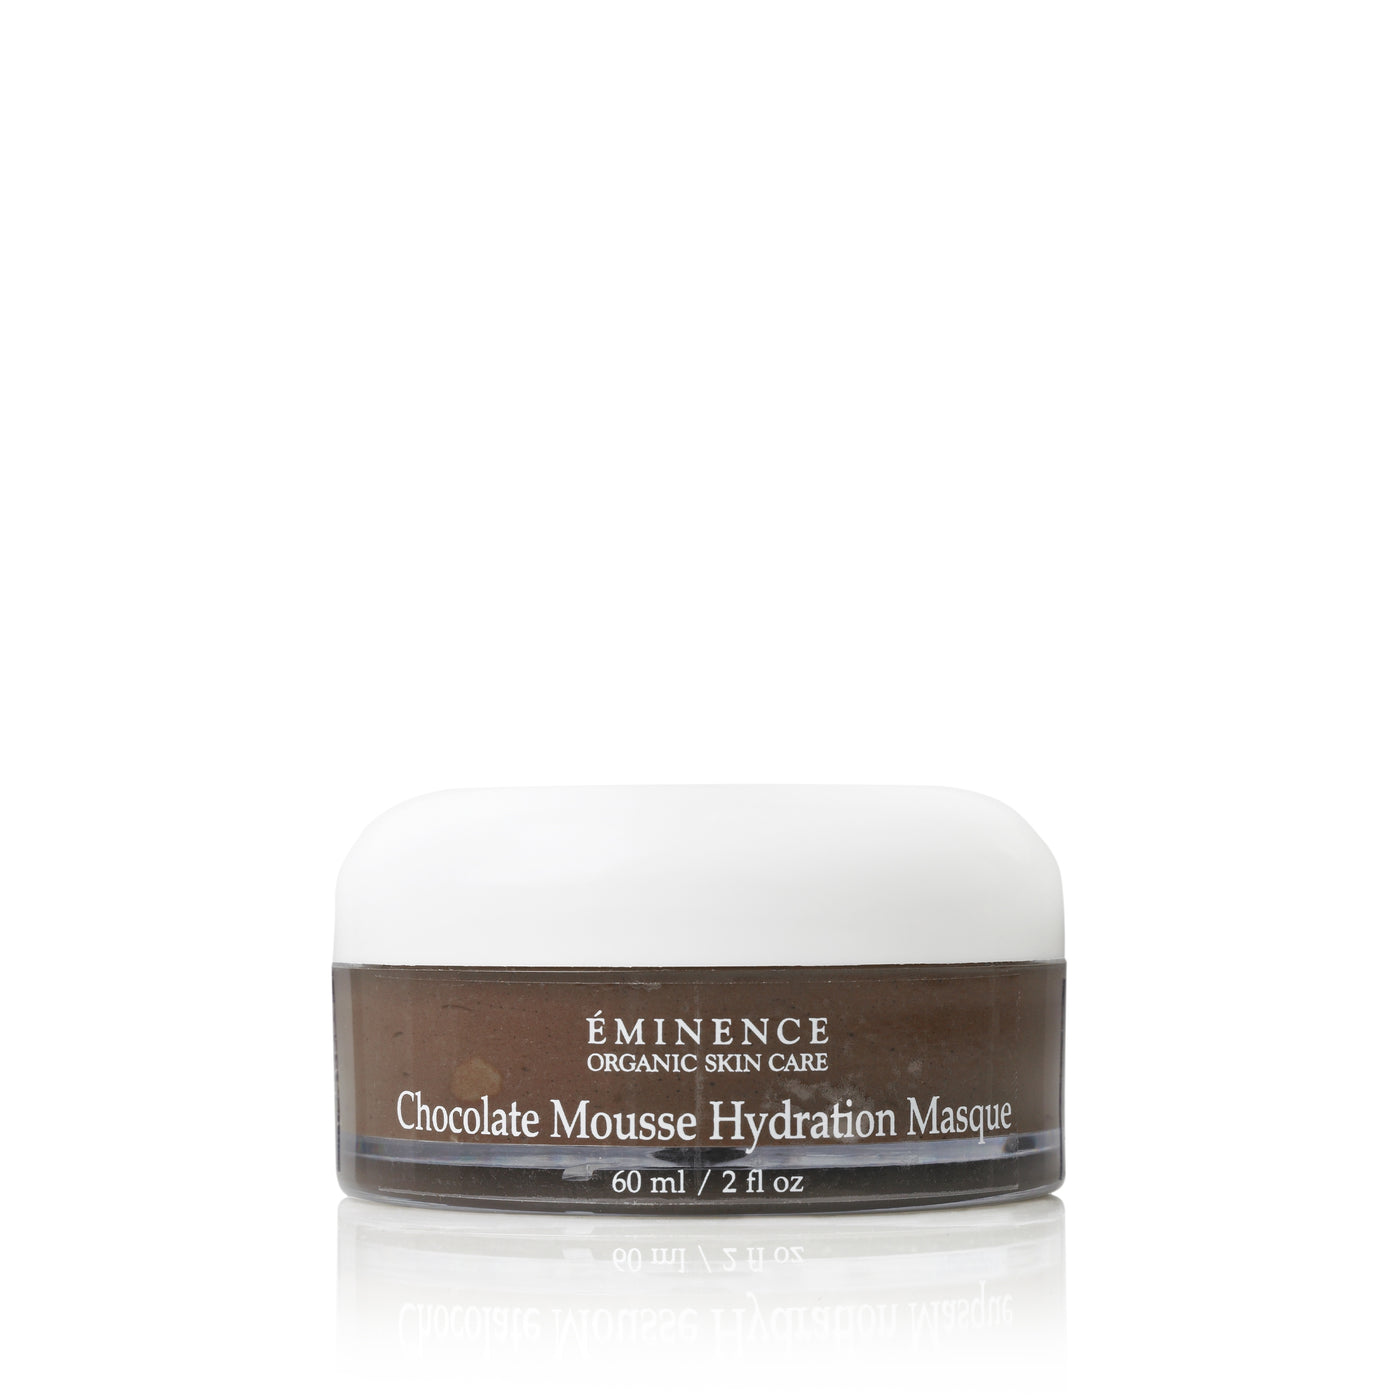 Eminence Organics Chocolate Mousse Hydration Masque - Radiance Clean Beauty